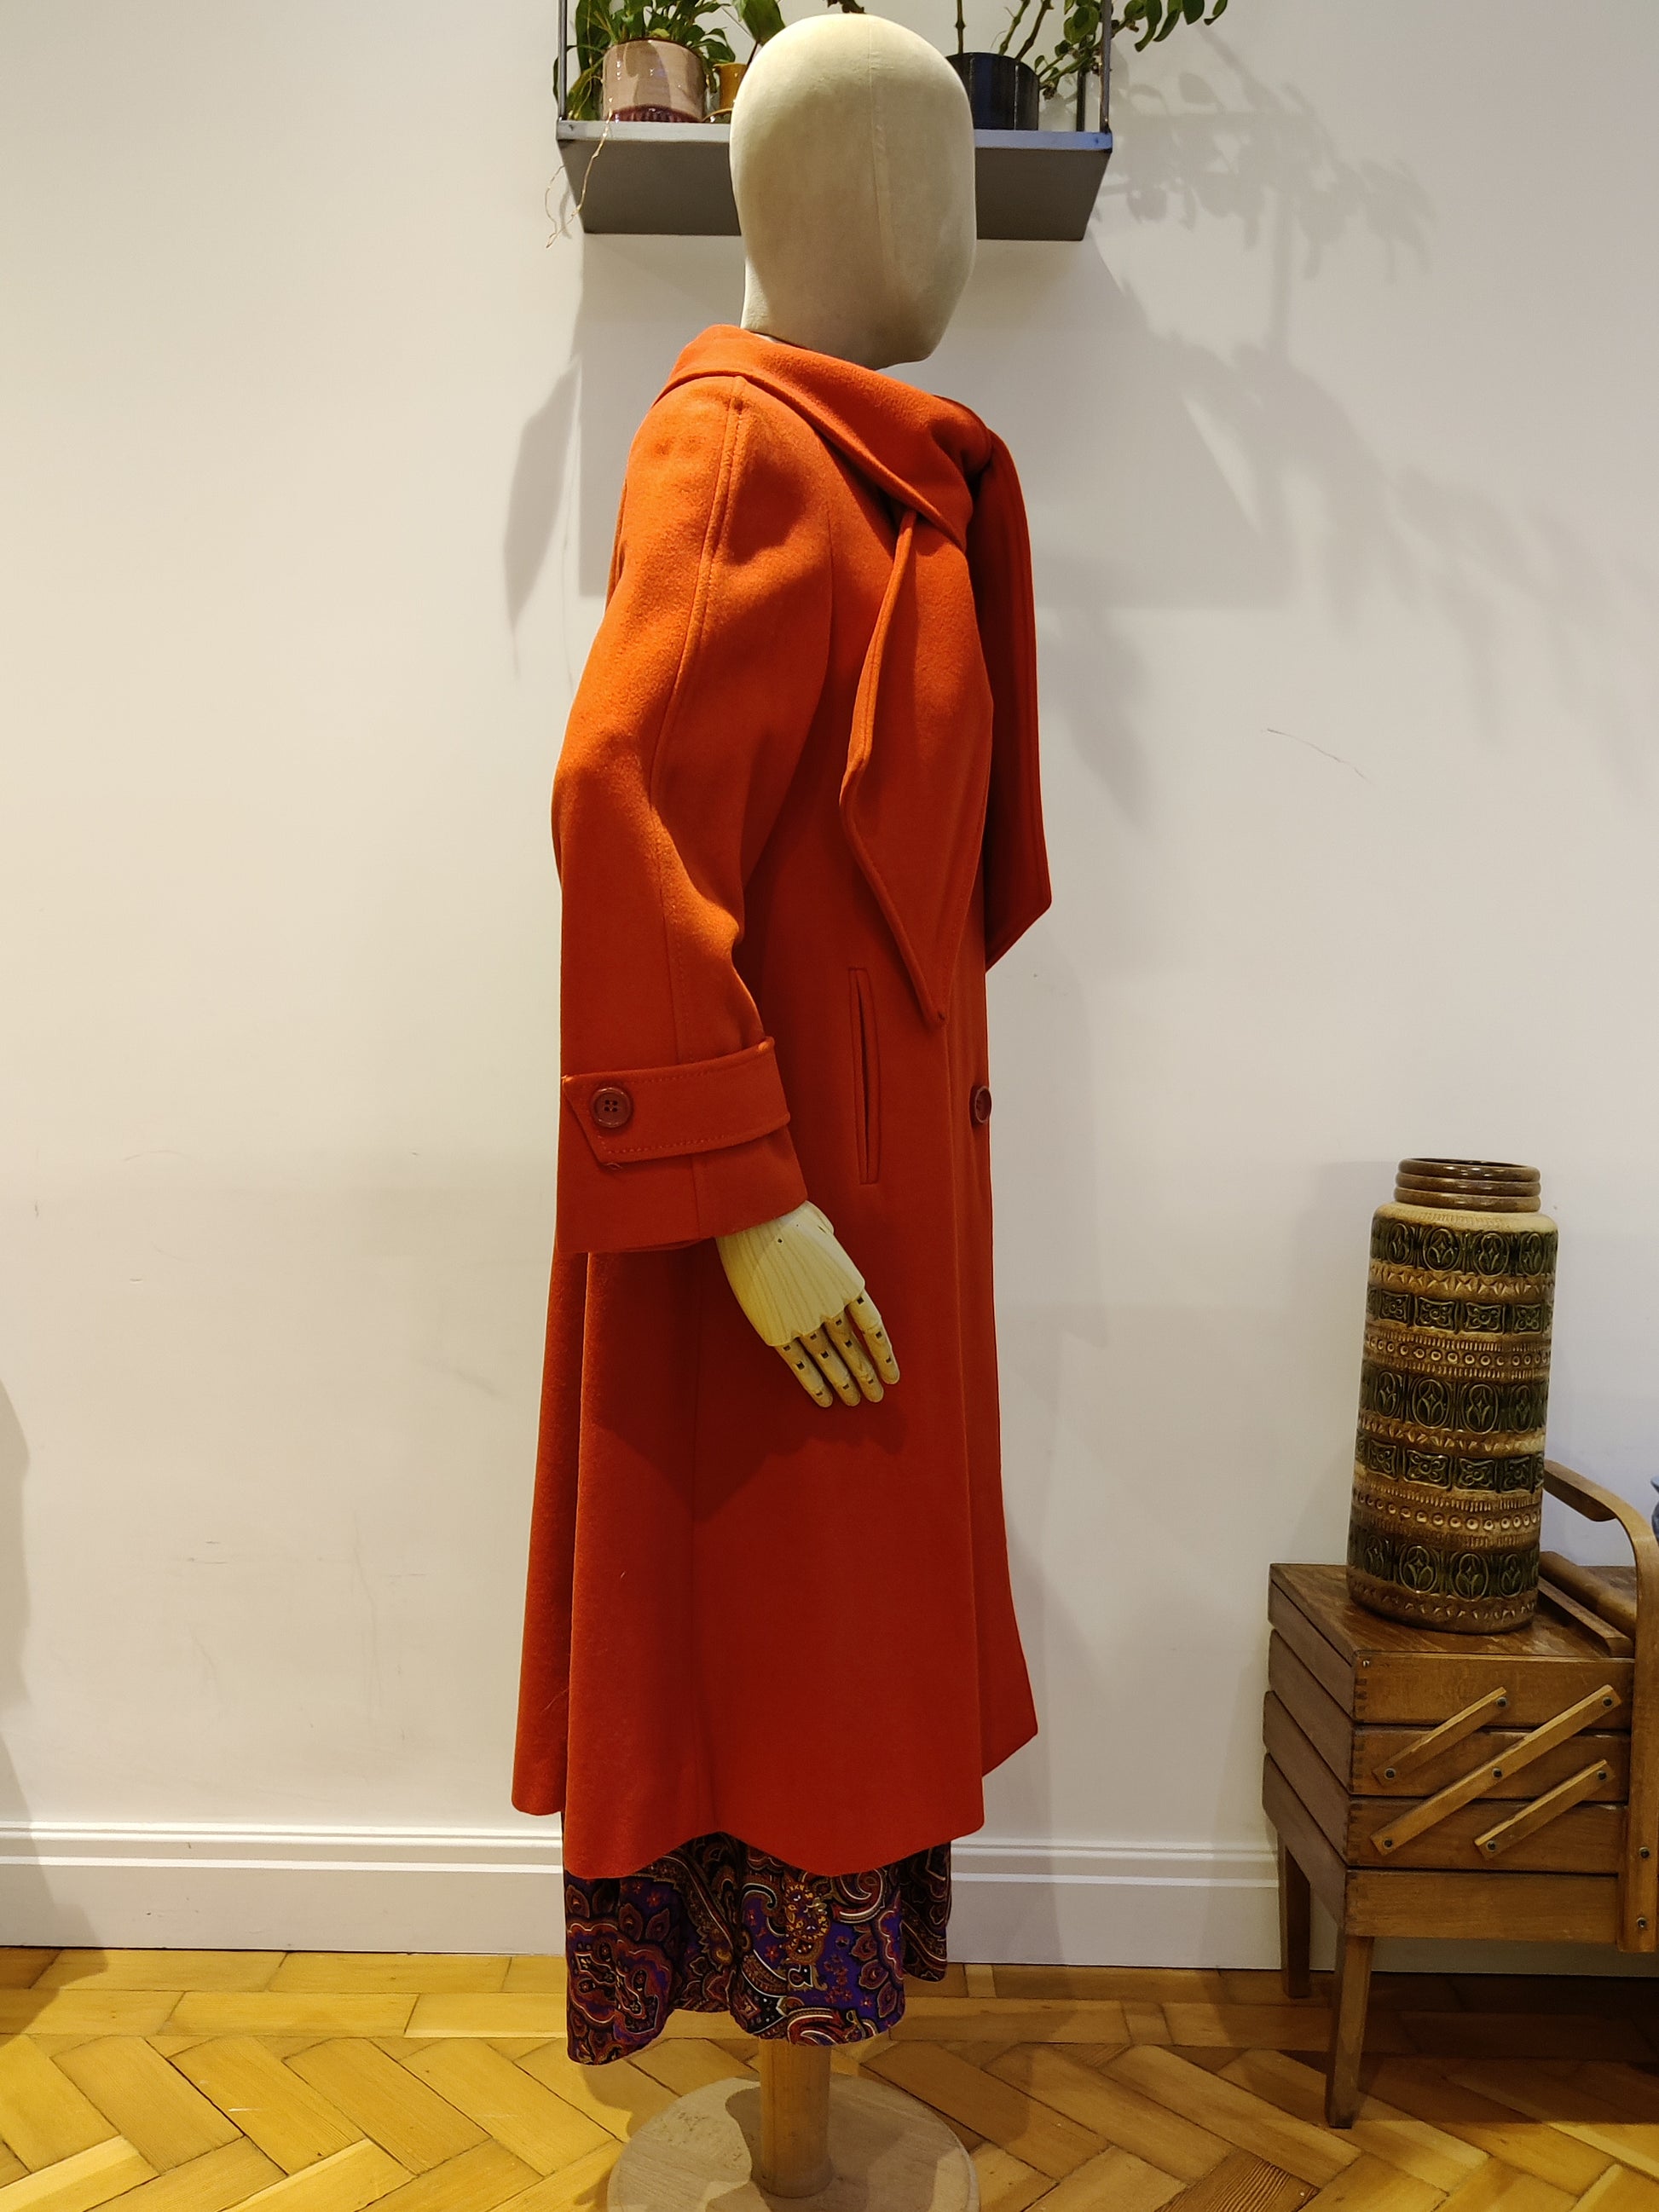 Gorgeous red wool coat